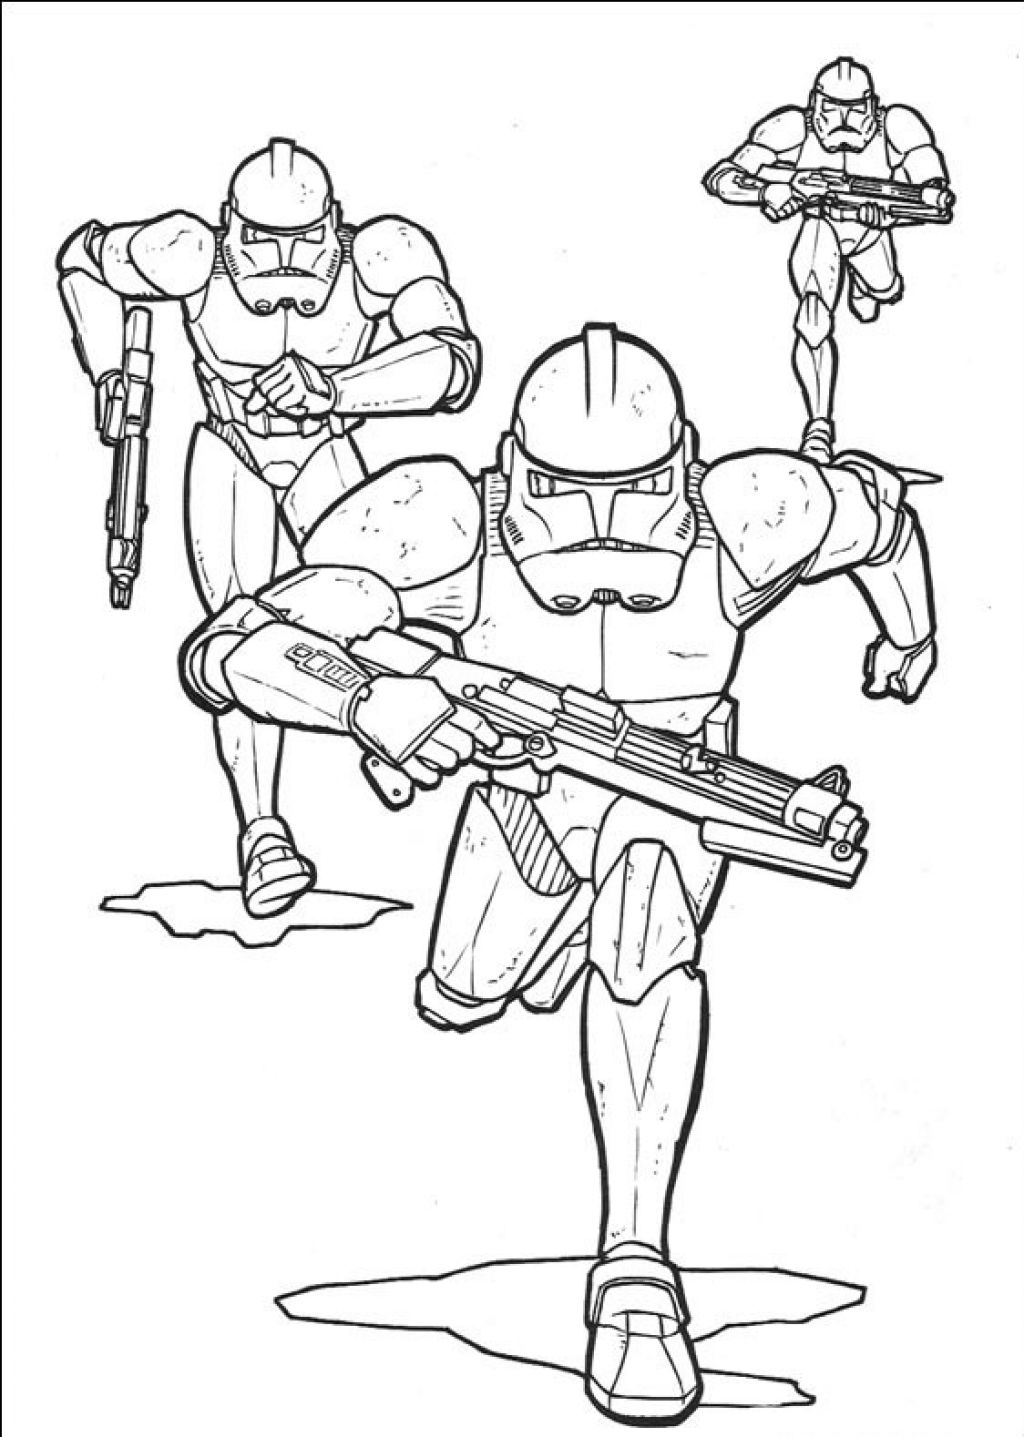 lego princess leia coloring pages